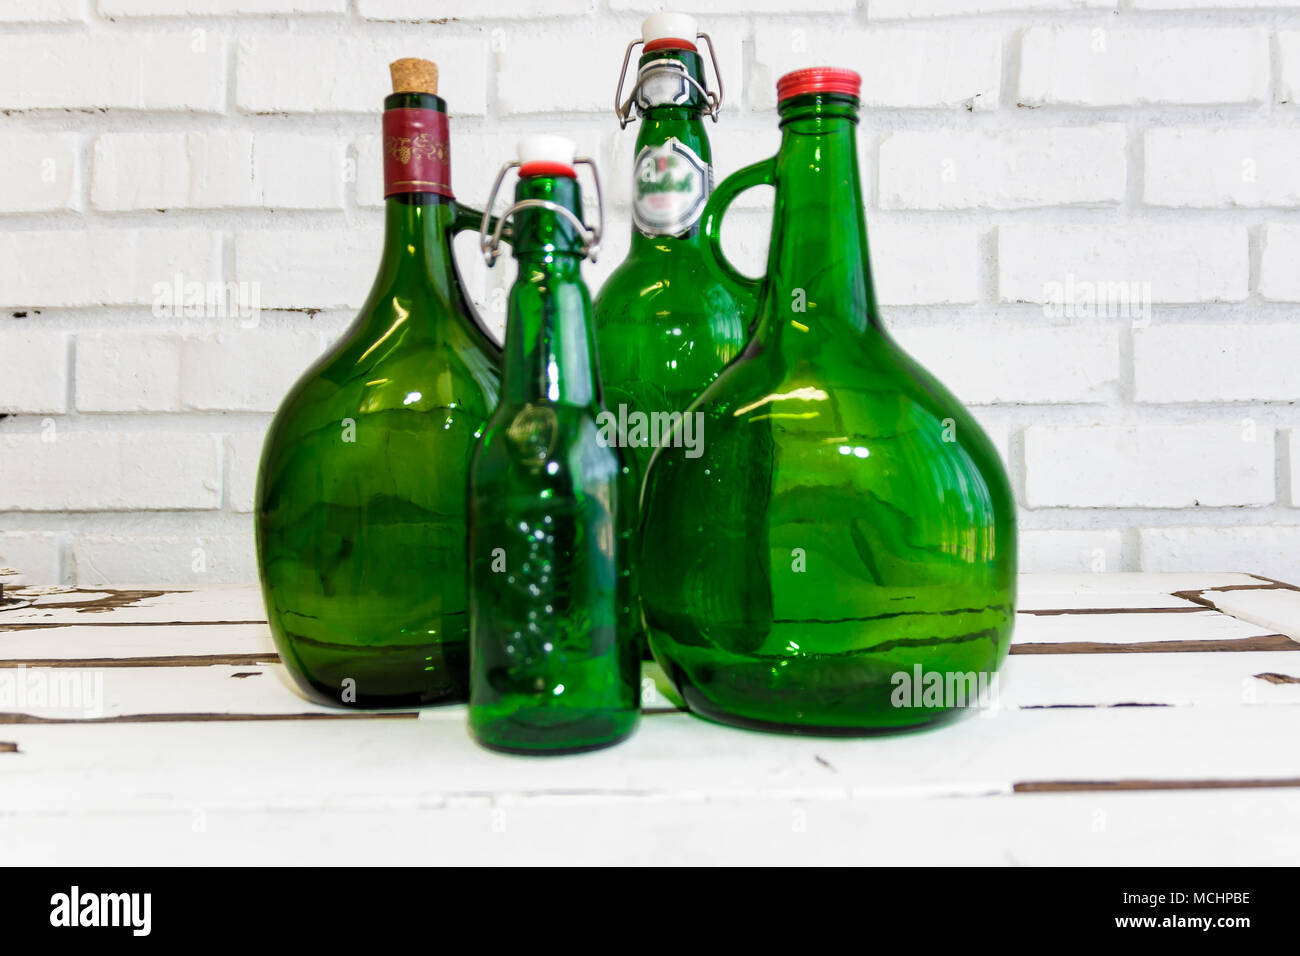 Vintage green glass bottles on an old white washed table Stock Photo